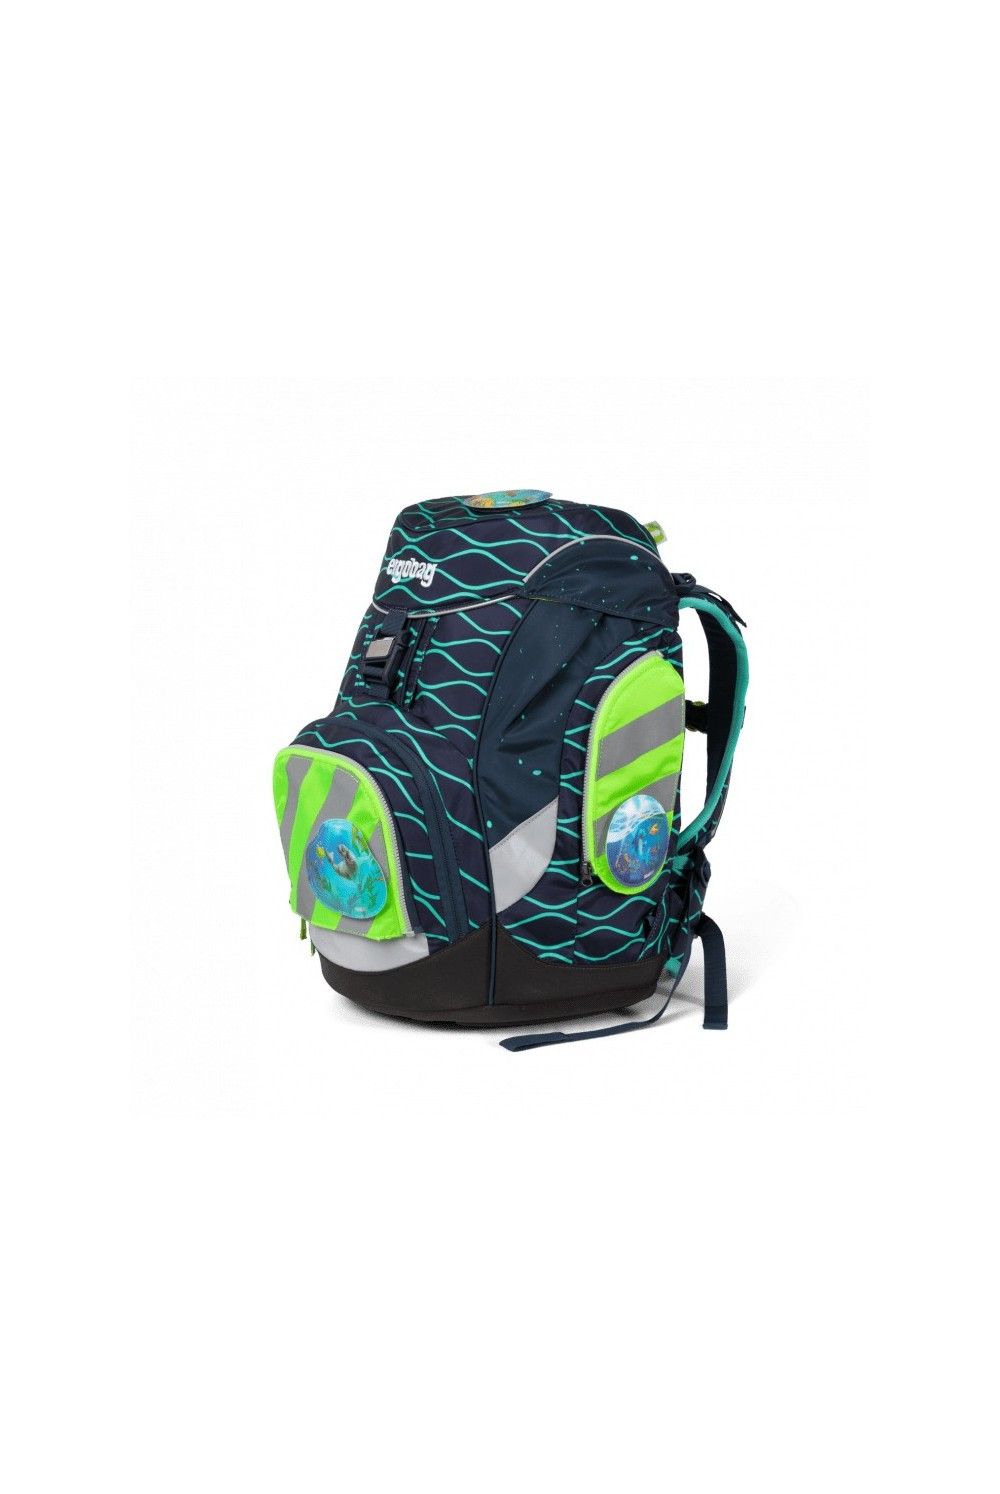 ergobag safety set with reflector green